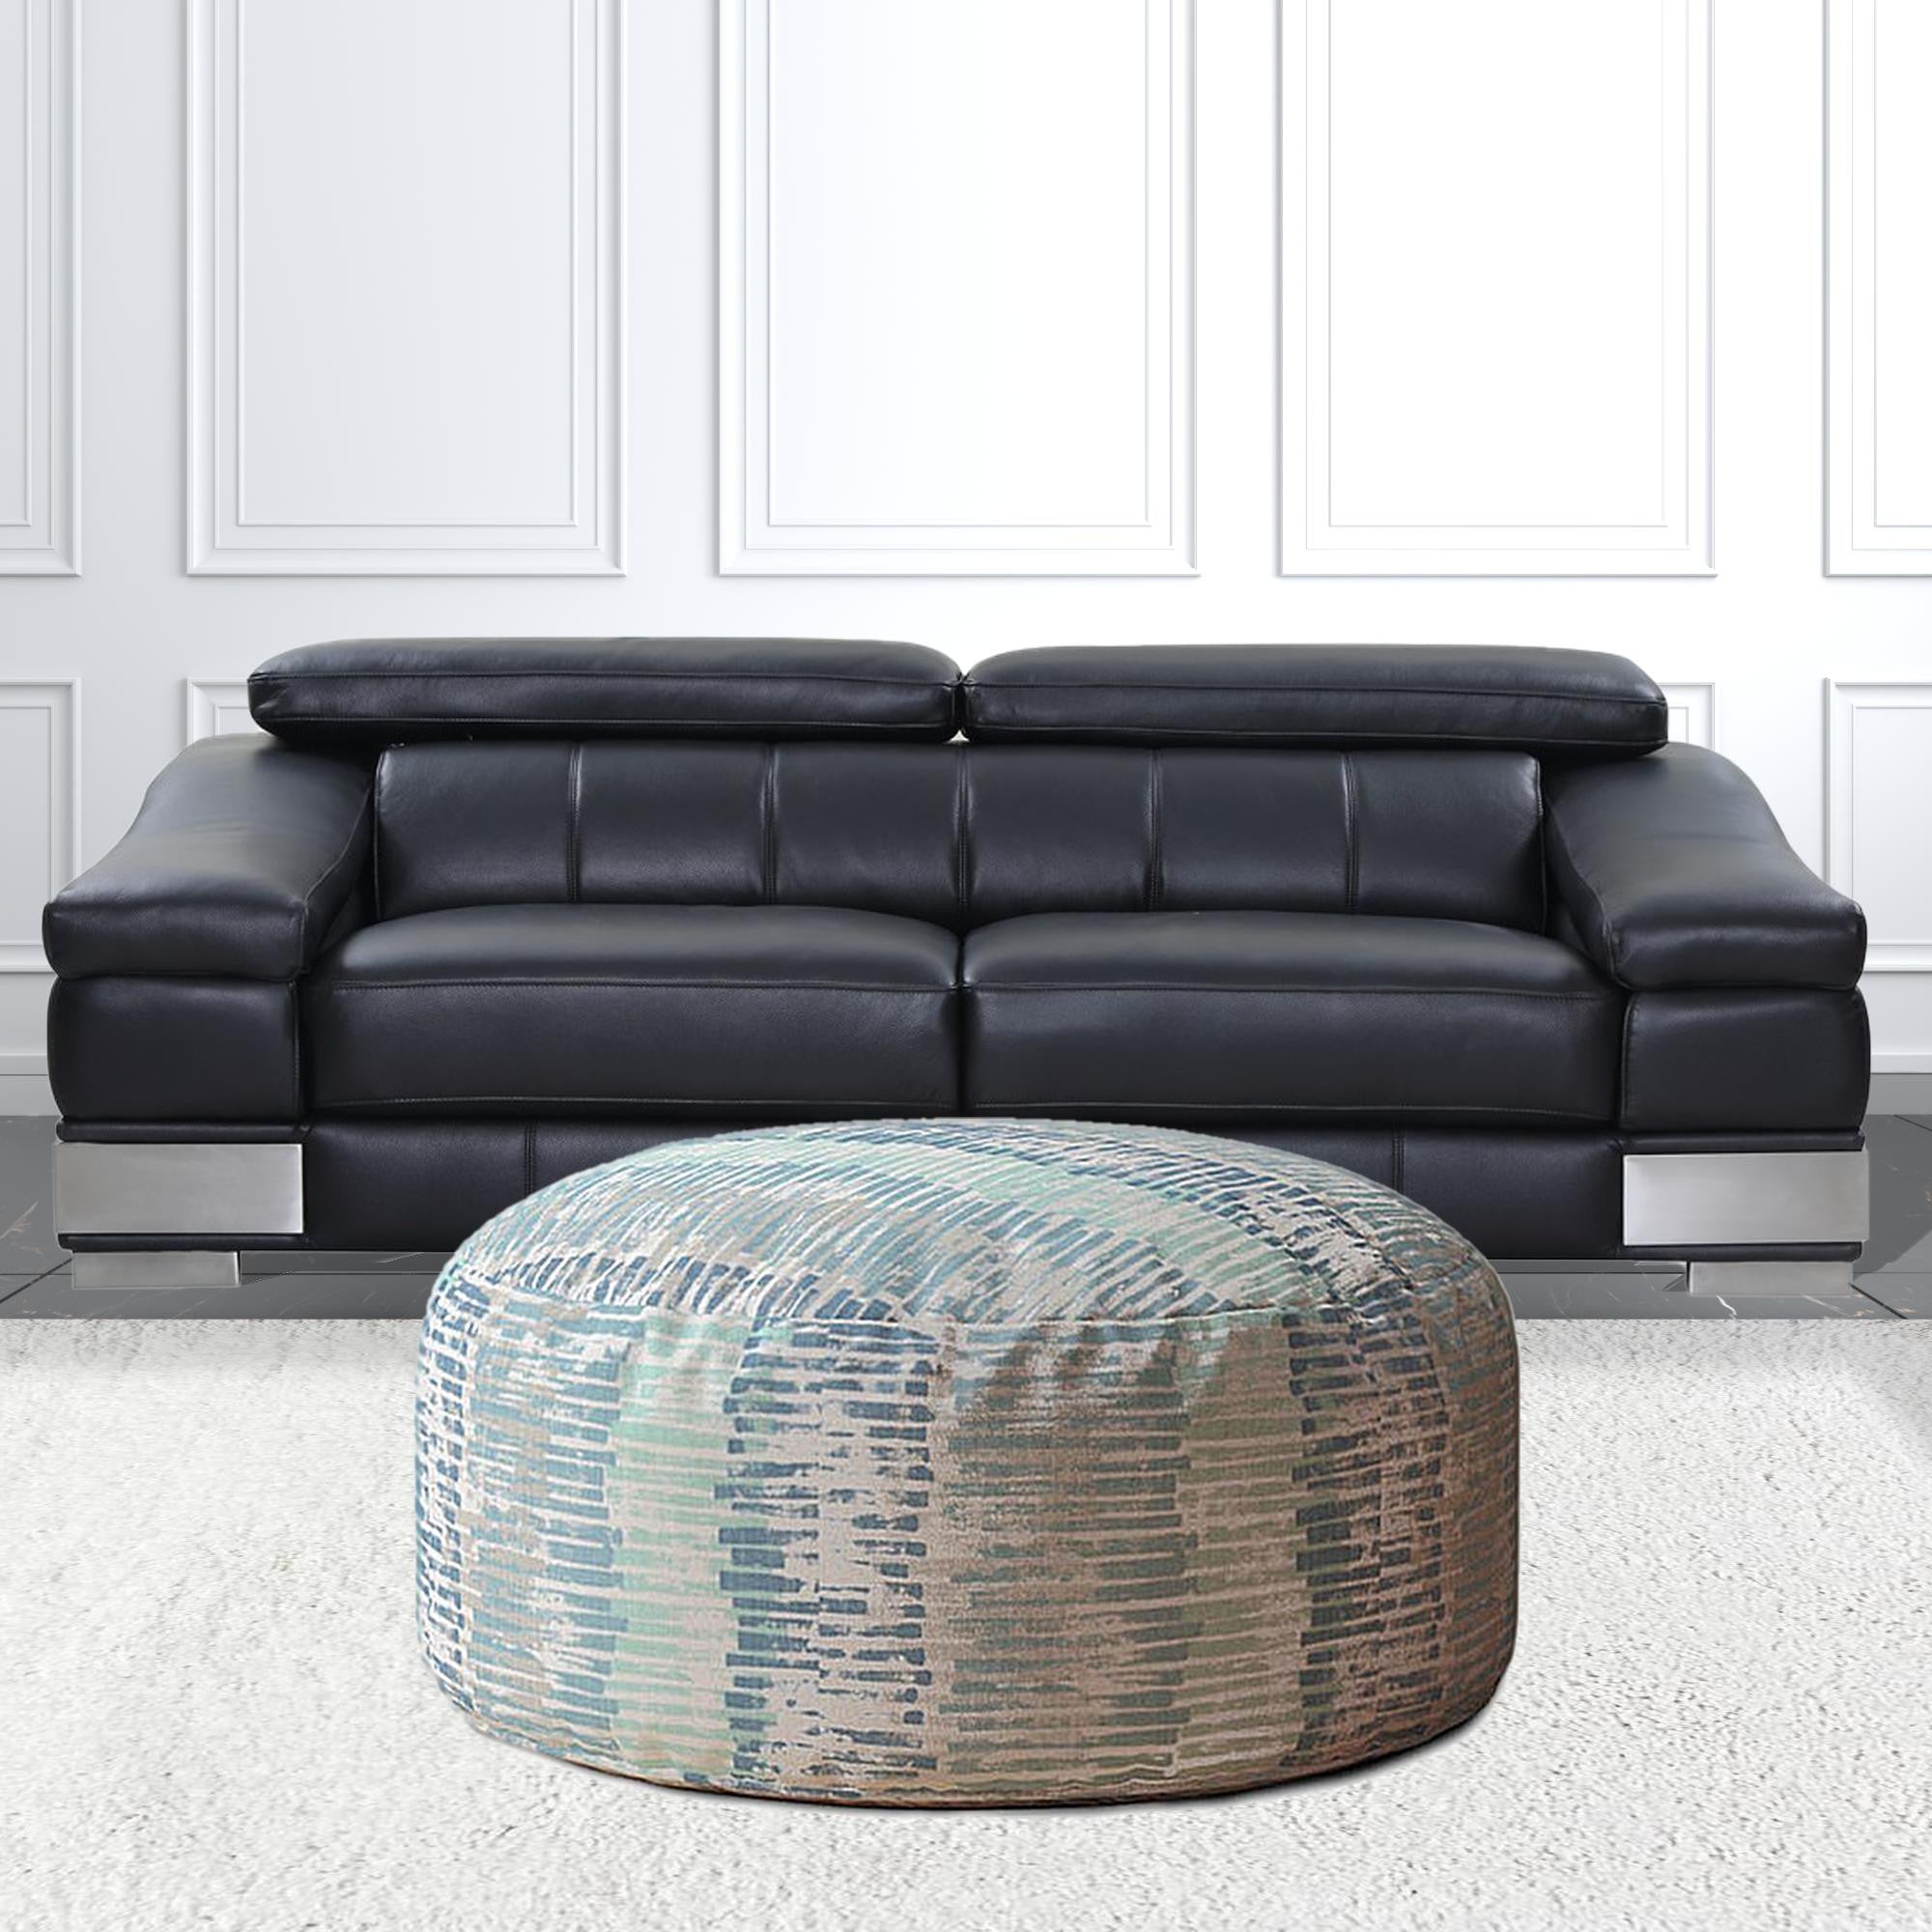 24" Blue And Gray Canvas Round Abstract Pouf Cover